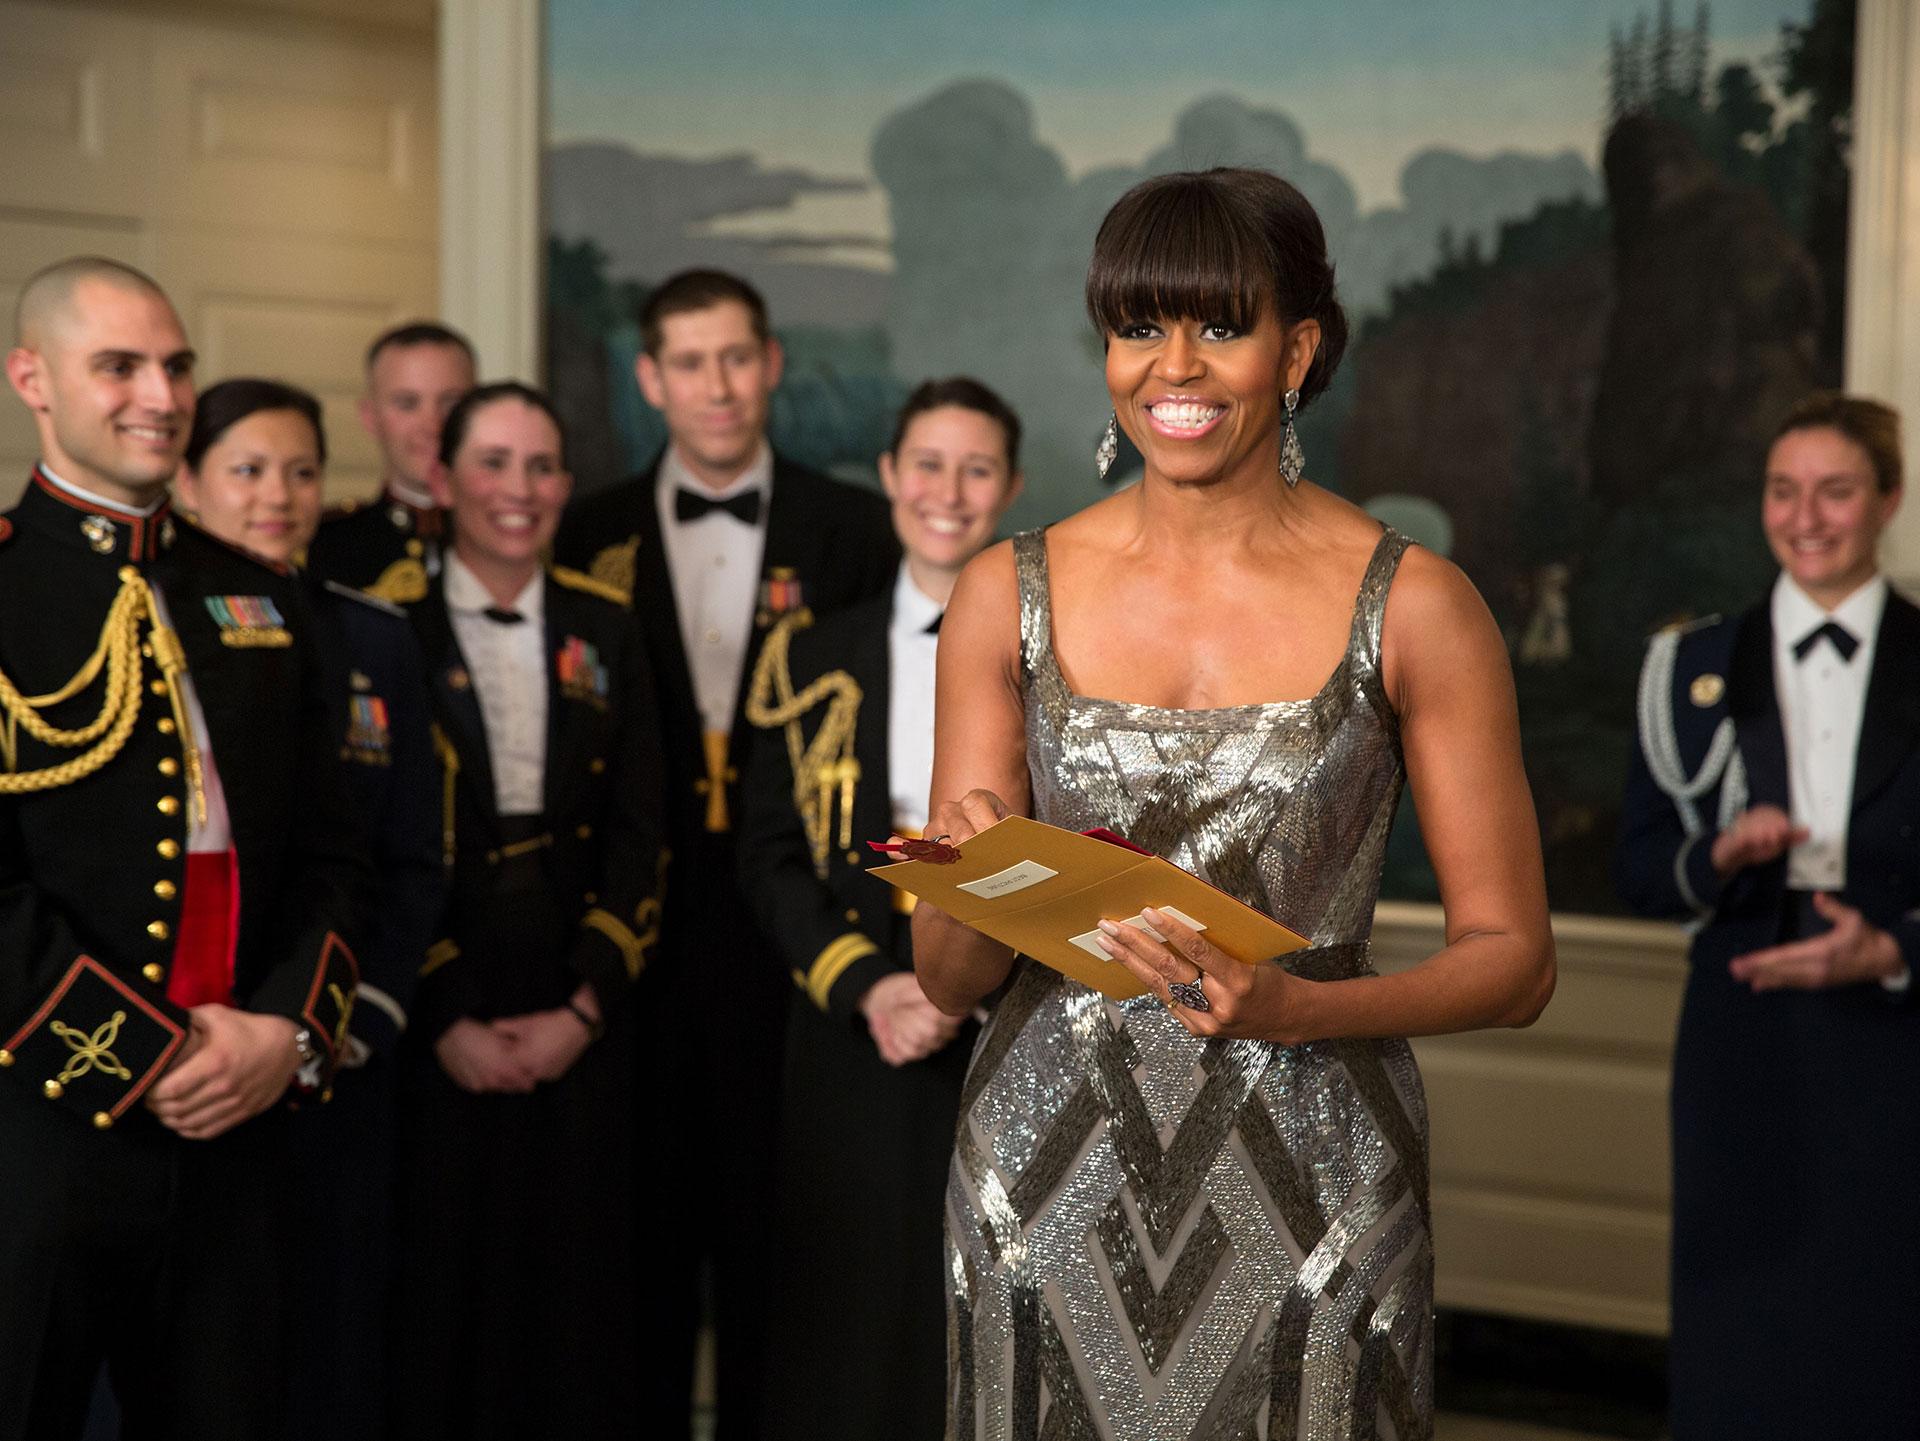 Michelle Obama’s top five moments as First Lady